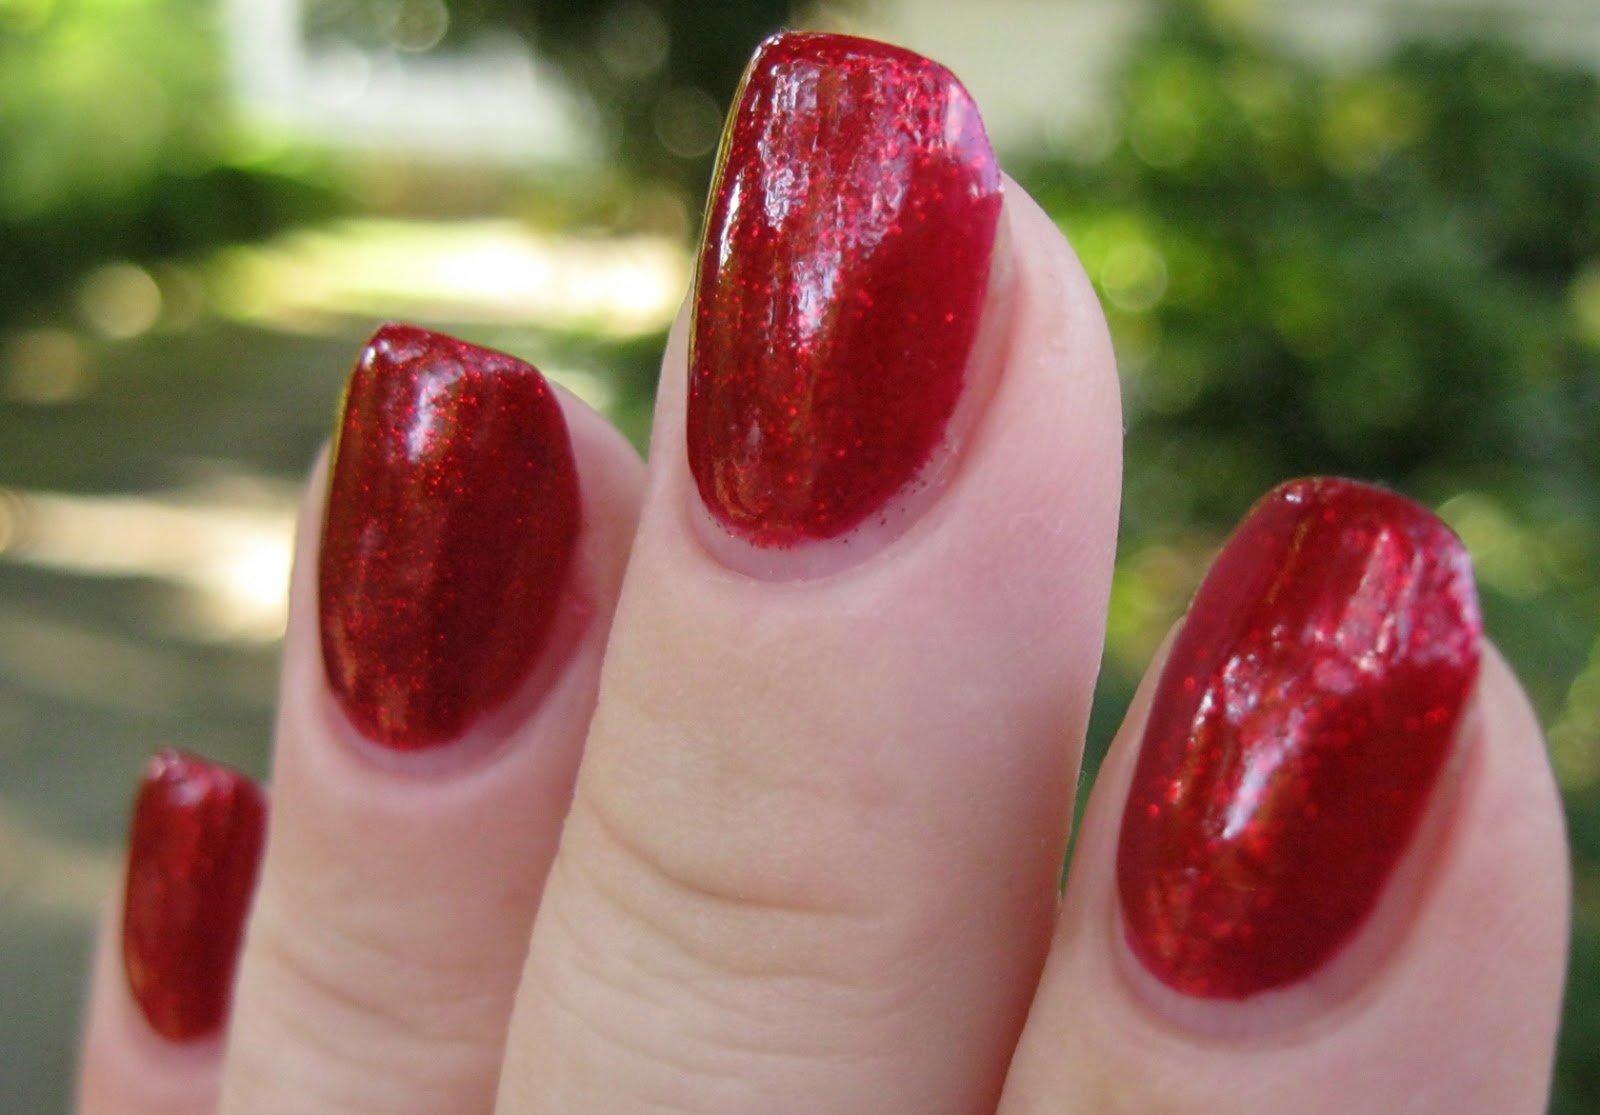 6. China Glaze Nail Lacquer in "Ruby Pumps" - wide 1